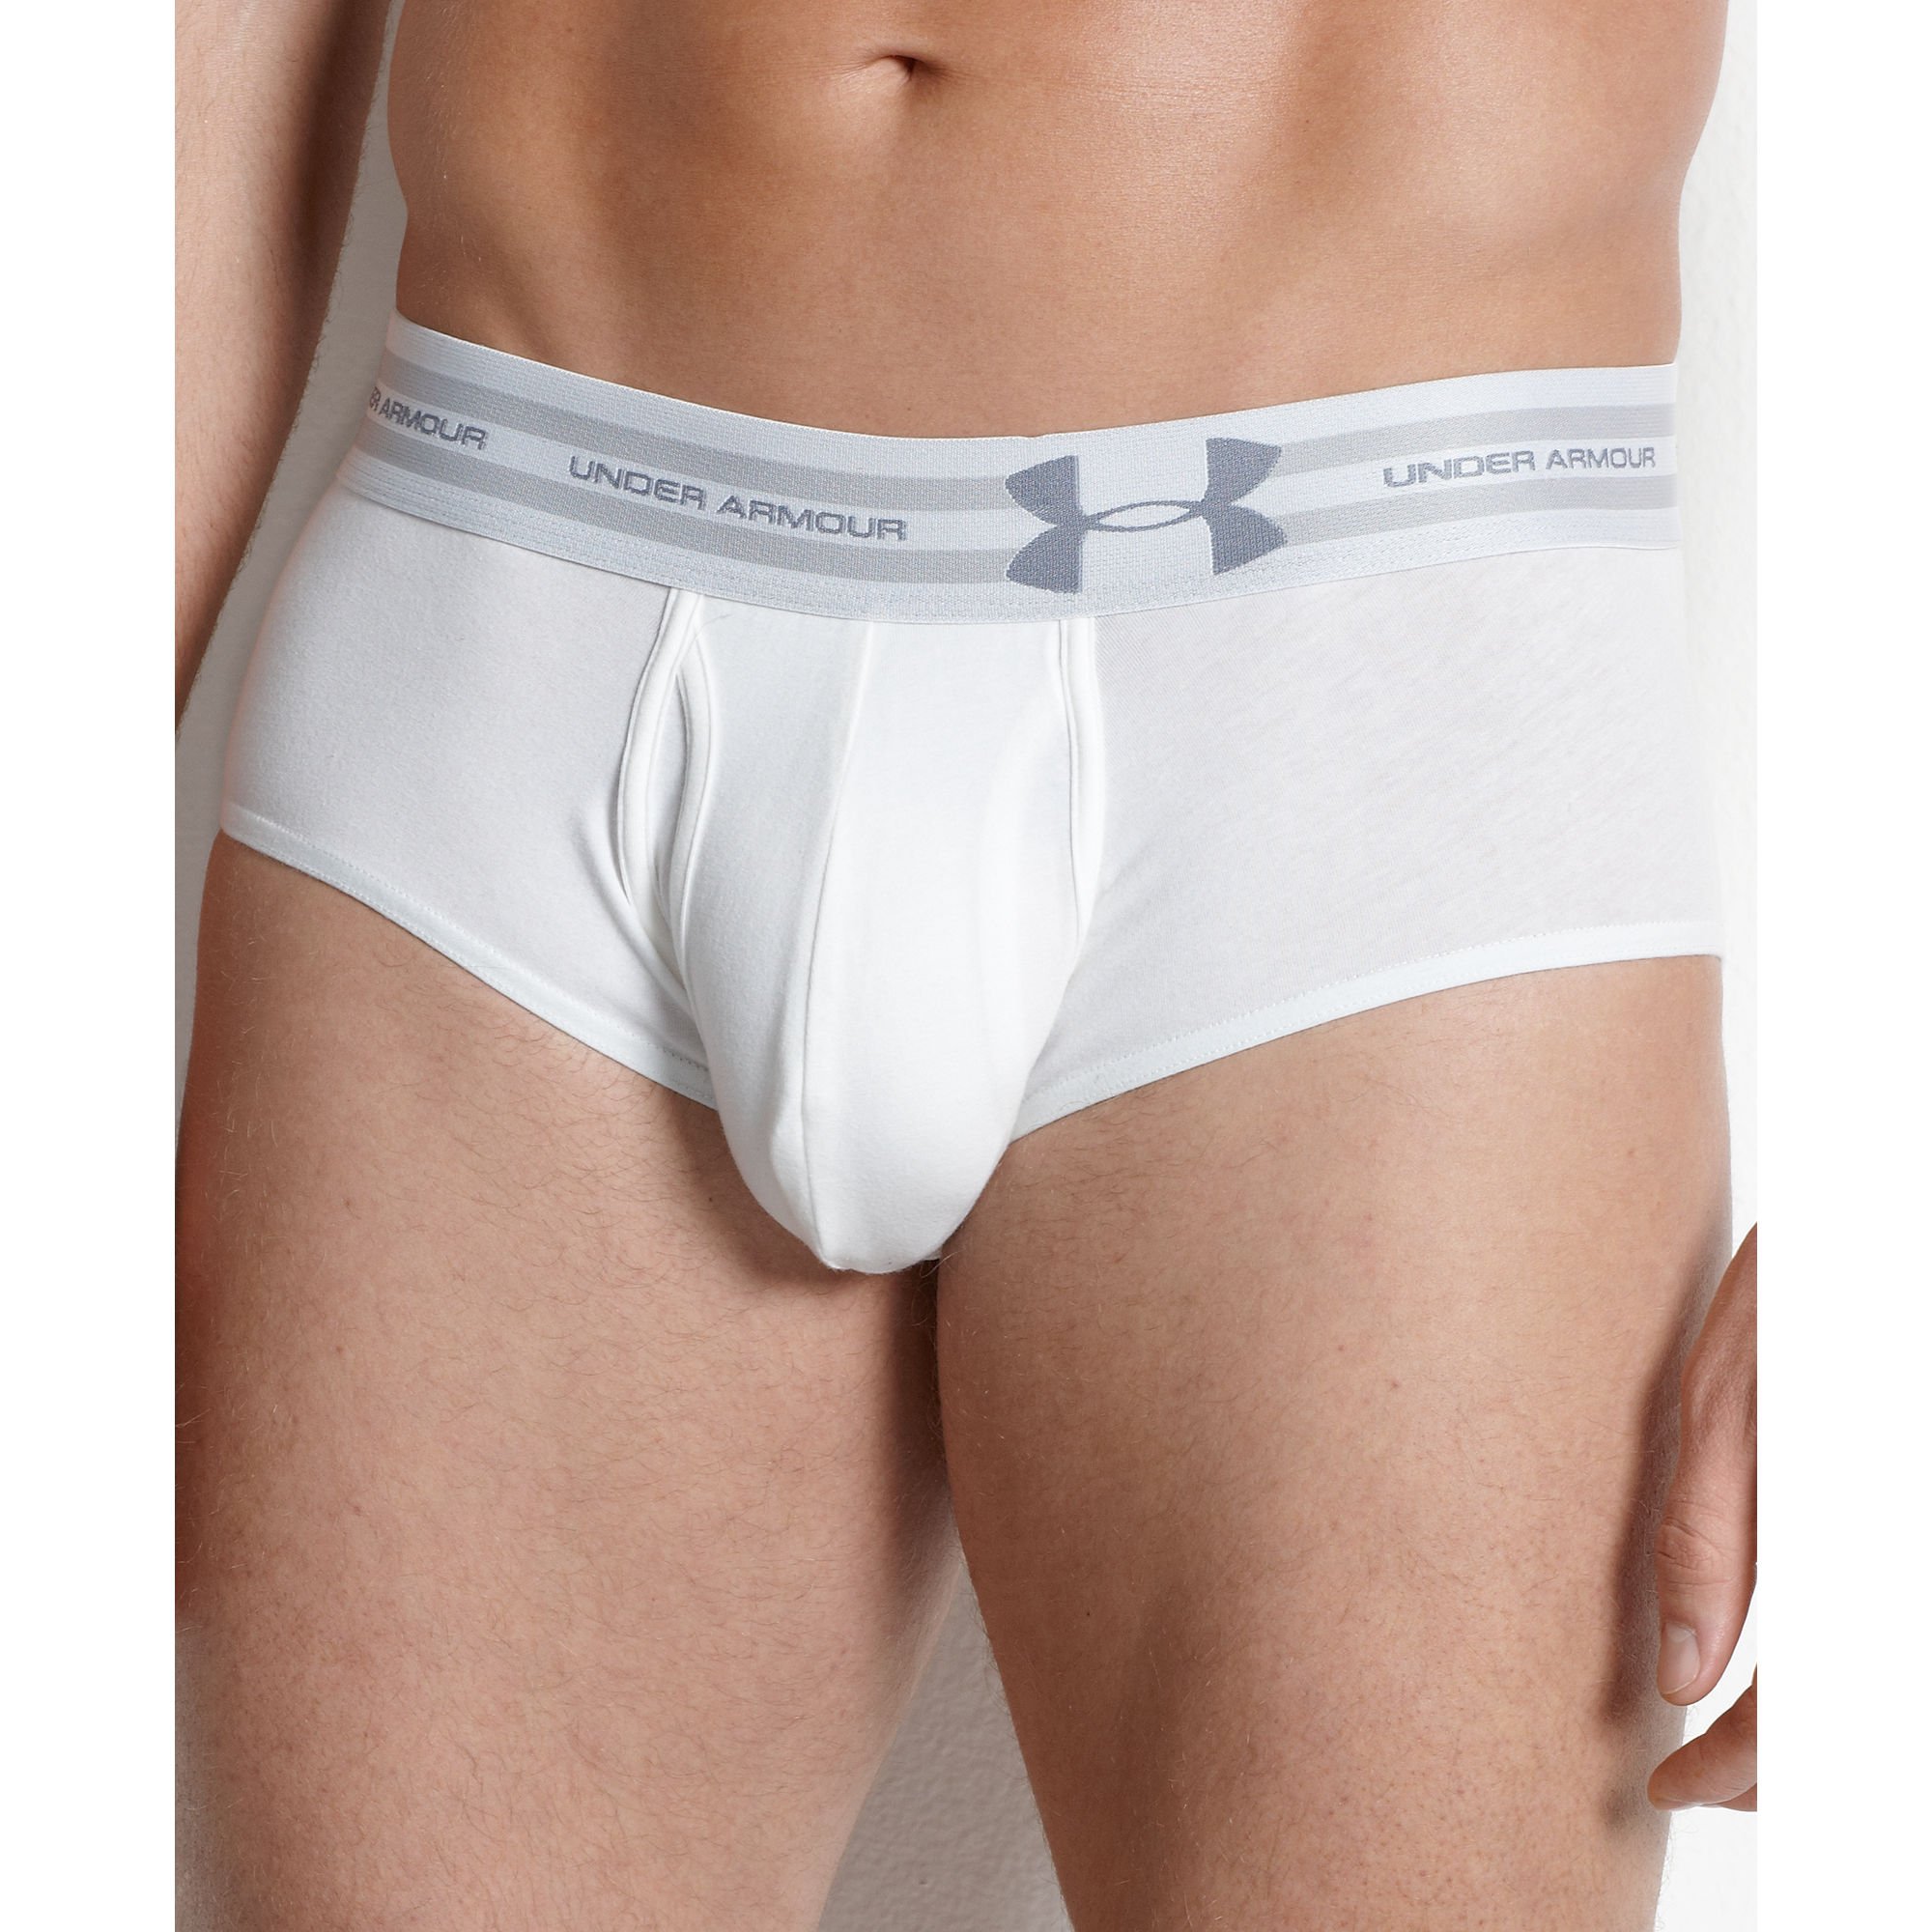 https://cdna.lystit.com/photos/2013/08/09/under-armour-white-charged-cotton-sport-brief-product-1-12585588-147296246.jpeg